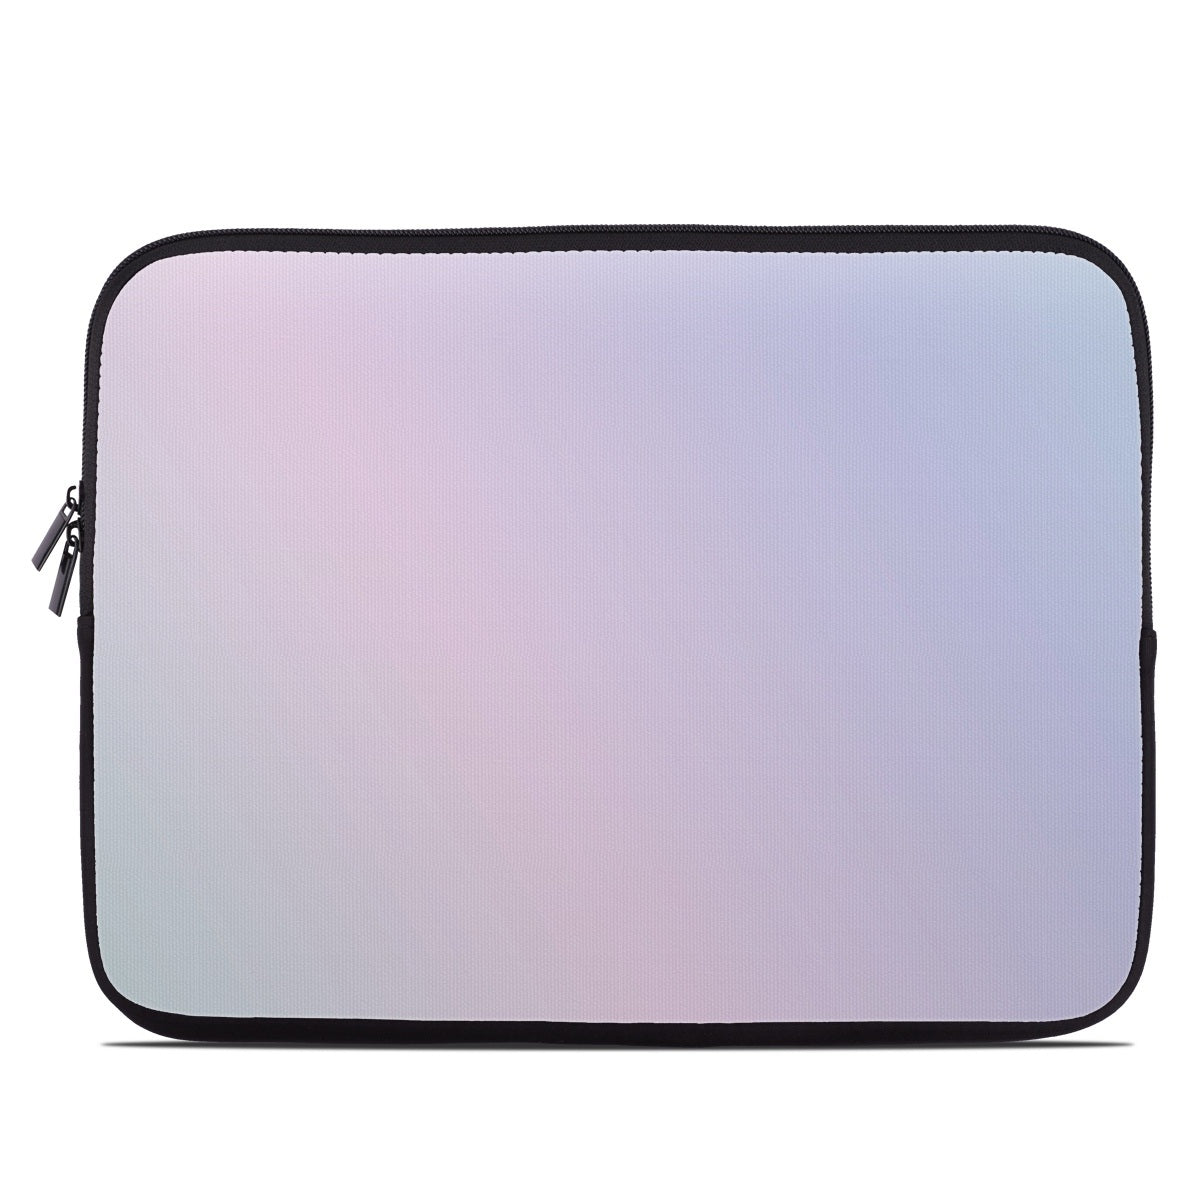 Cotton Candy - Laptop Sleeve